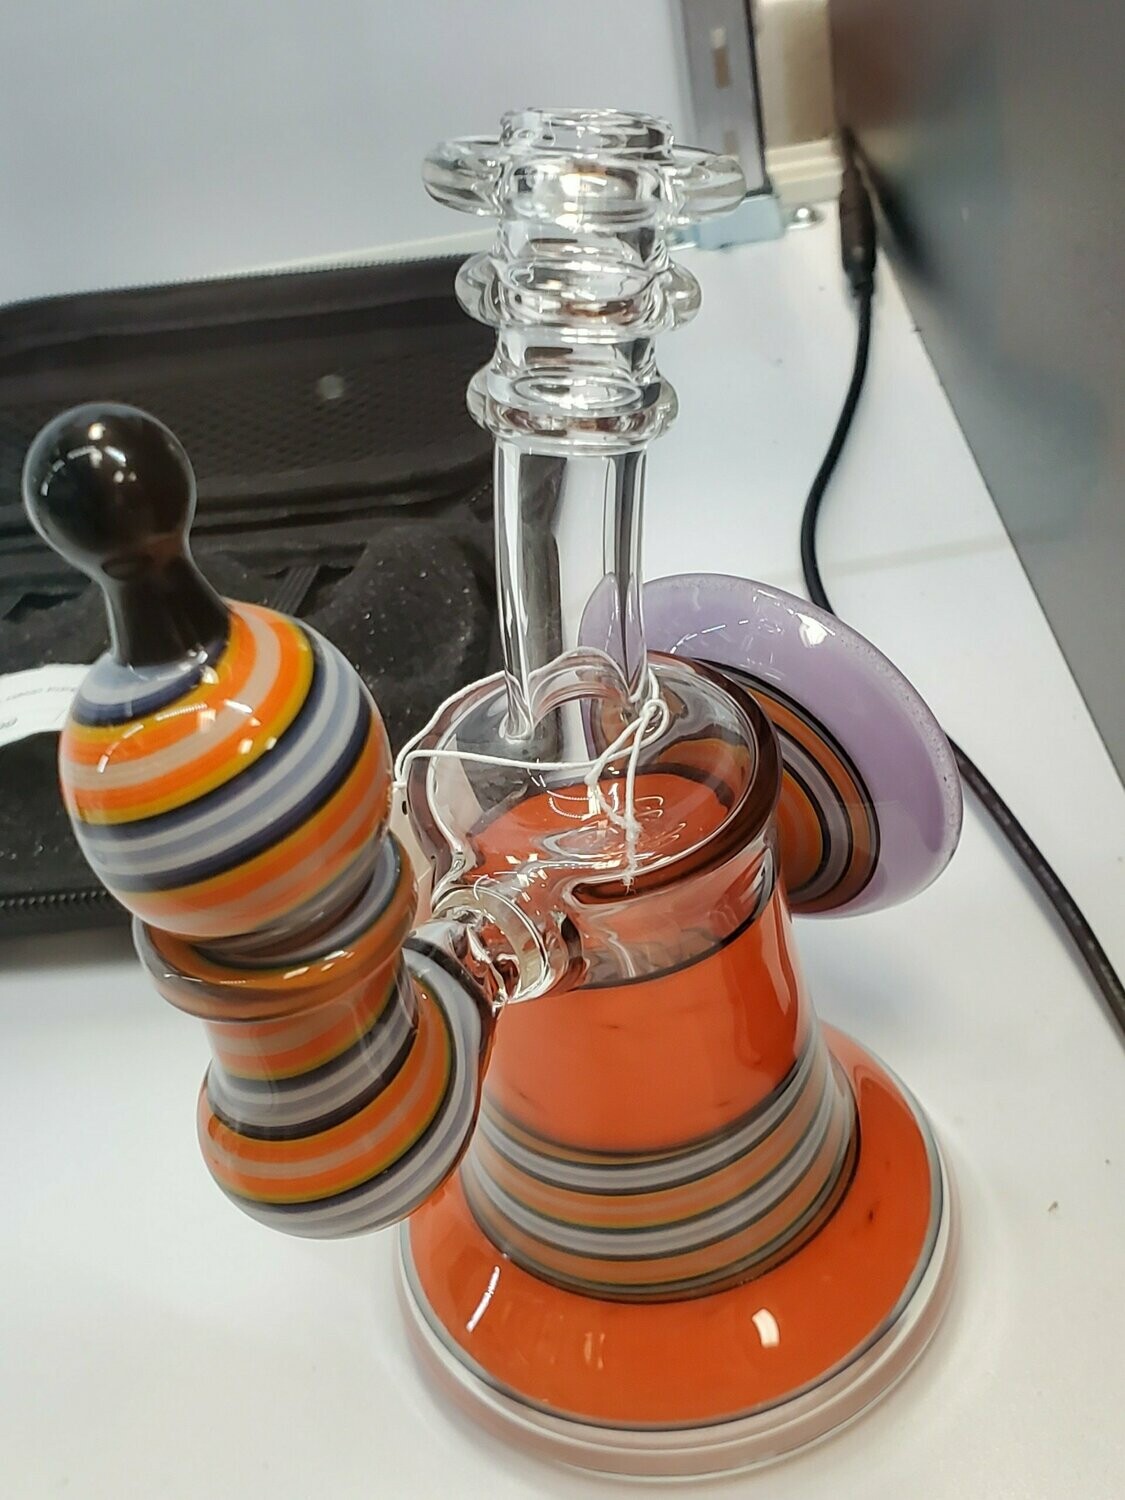 ADAM DRIVER 14MM DISC RIG IN HOT SAUCE AND WYSTERIA